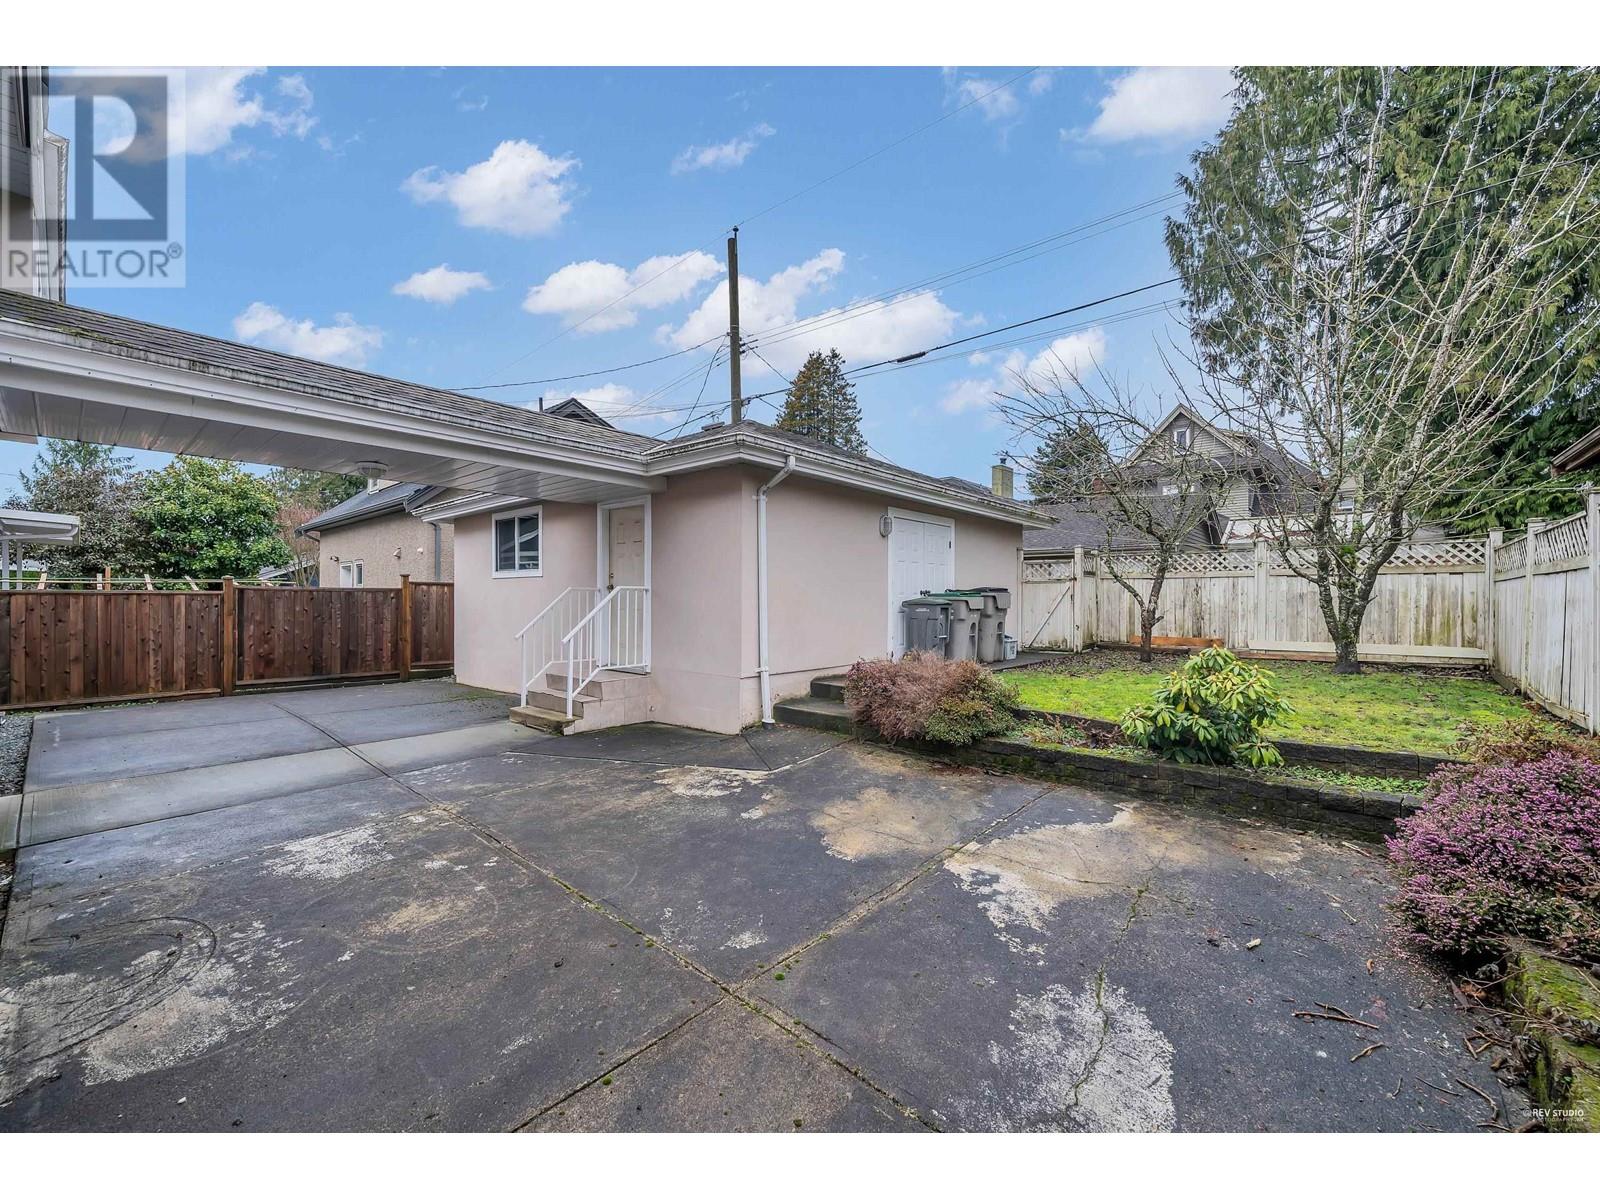 Listing Picture 31 of 32 : 1945 W 44TH AVENUE, Vancouver / 溫哥華 - 魯藝地產 Yvonne Lu Group - MLS Medallion Club Member